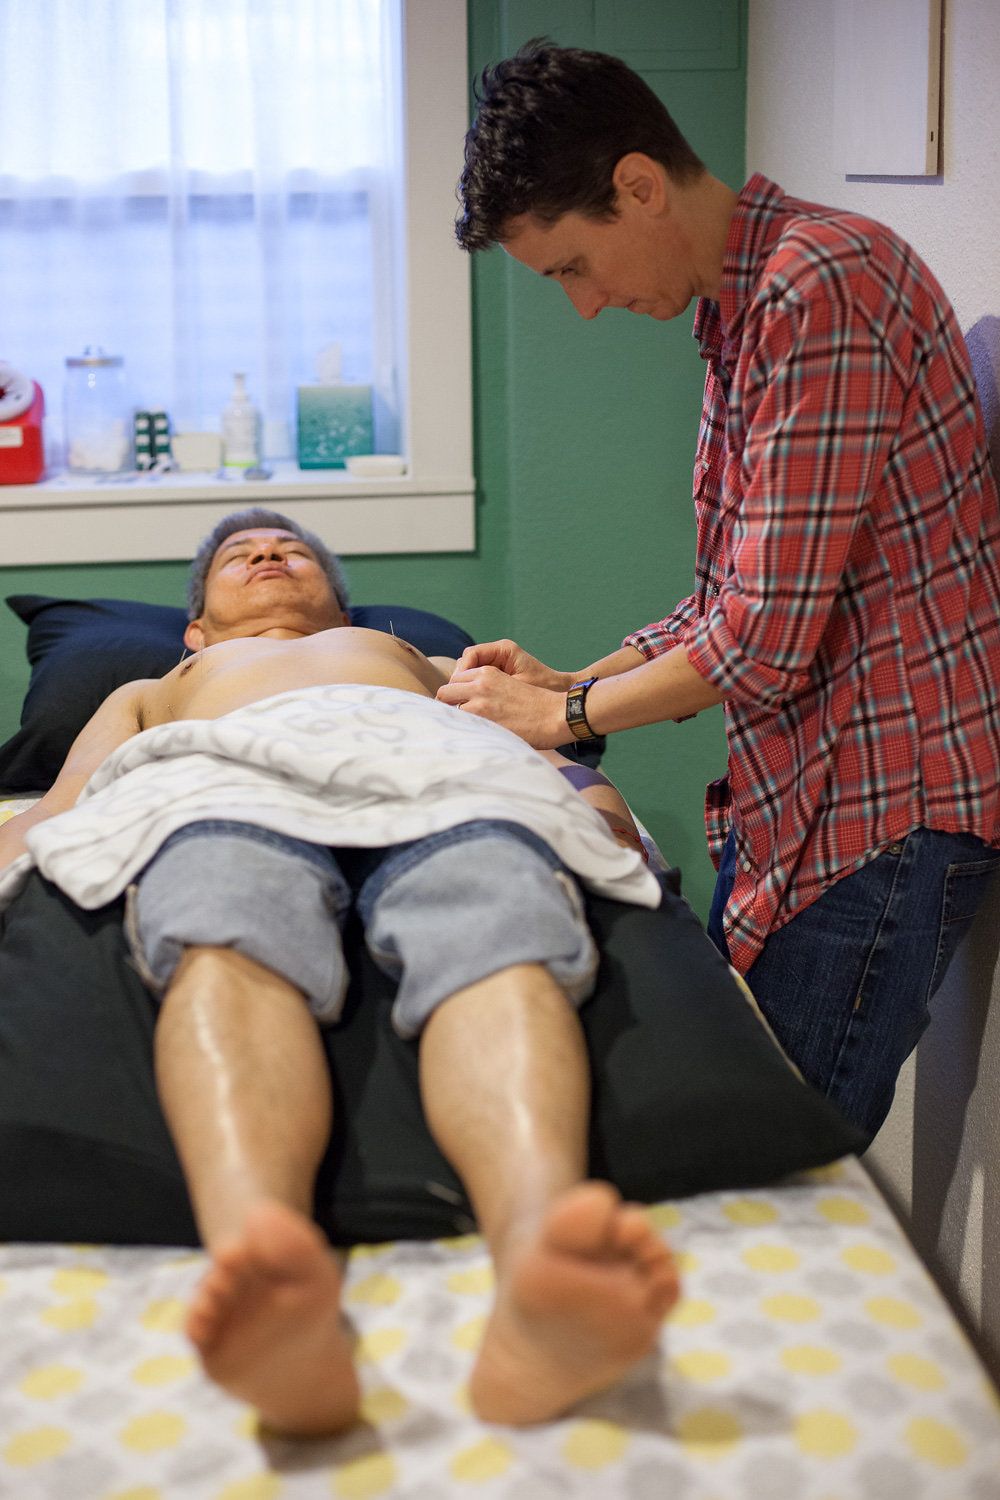 An Asian man in his fifties lays face up on a massage table.  He is not wearing a shirt and his jeans are rolled up to his knees.  He has a black pillow underneath his knees and head.  Acupuncturist Lynn is inserting an acupuncture needle into his left arm.  His eyes are closed and he appears calm.  